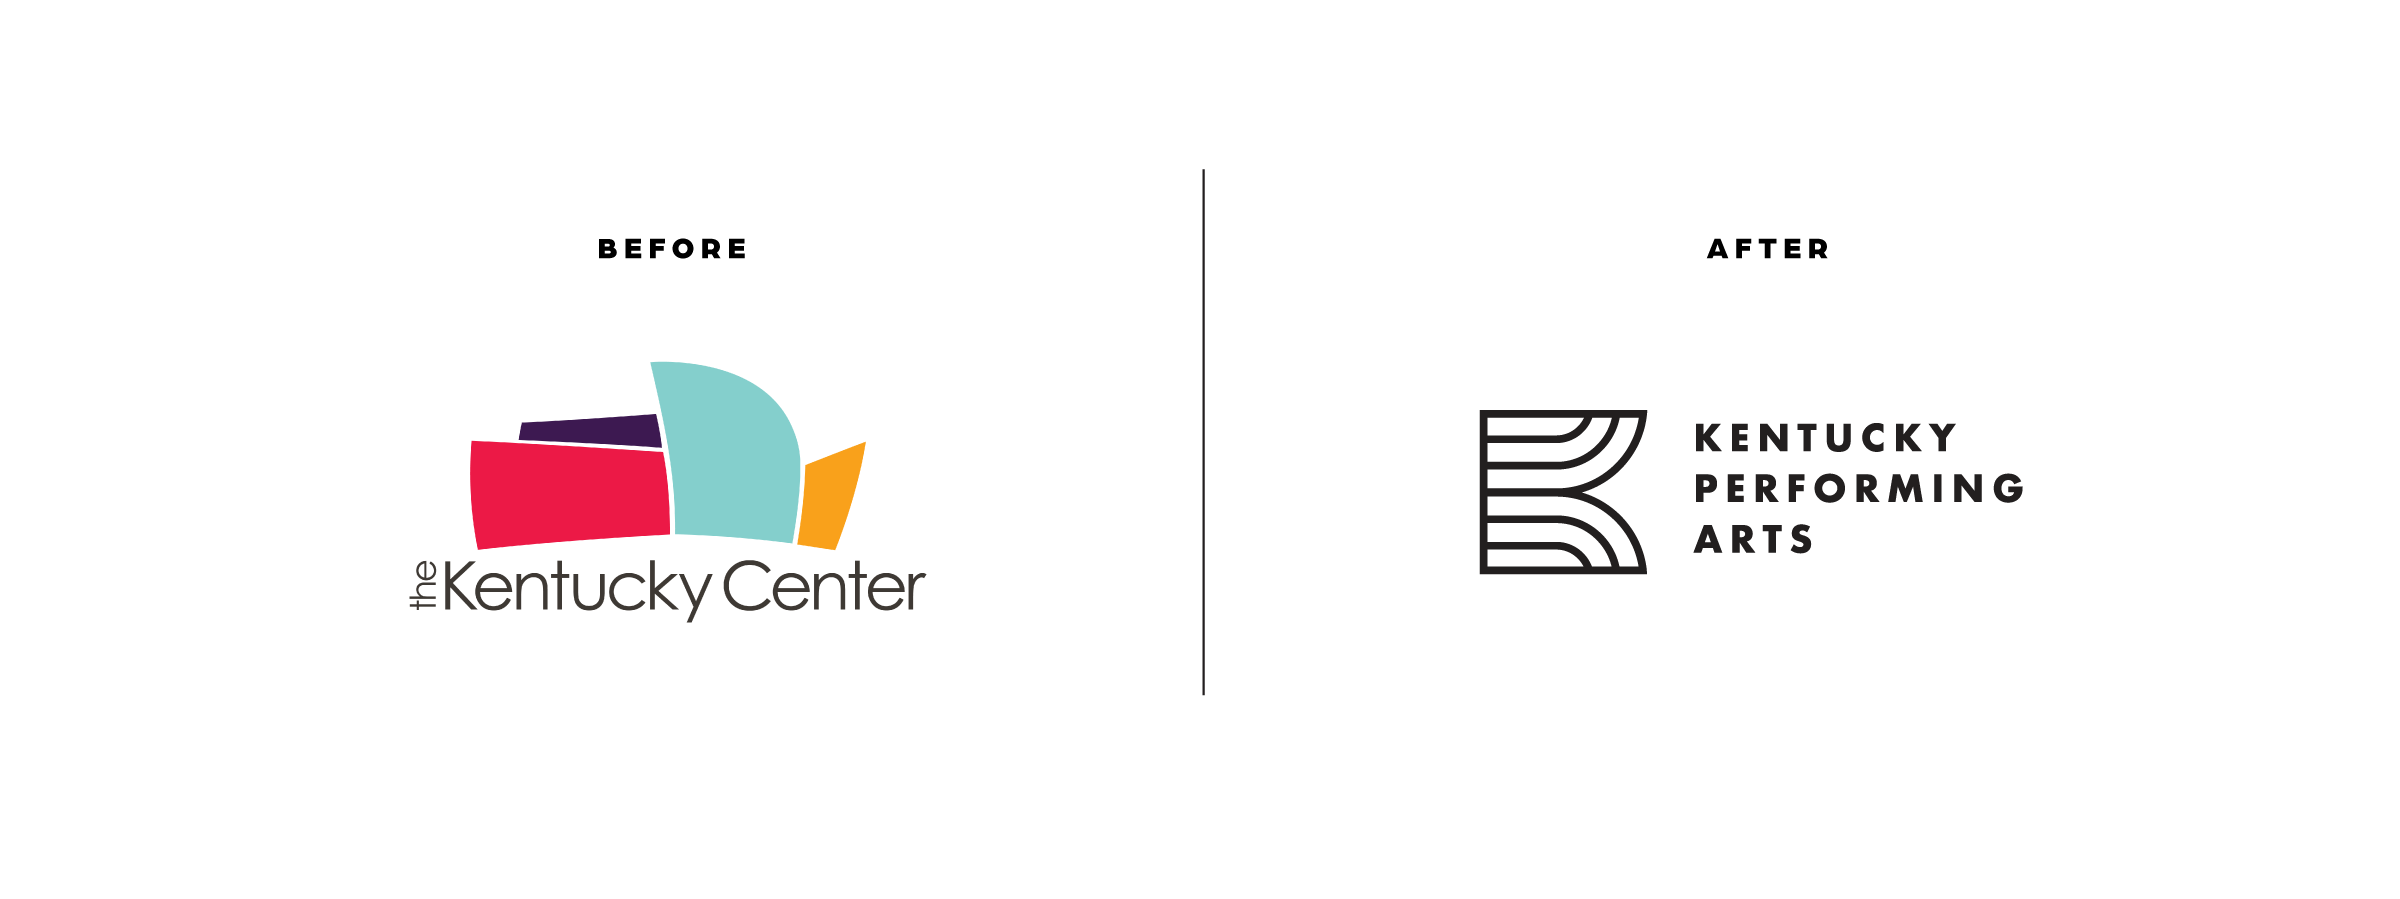 Kentucky Performing Arts Center before and after logos.